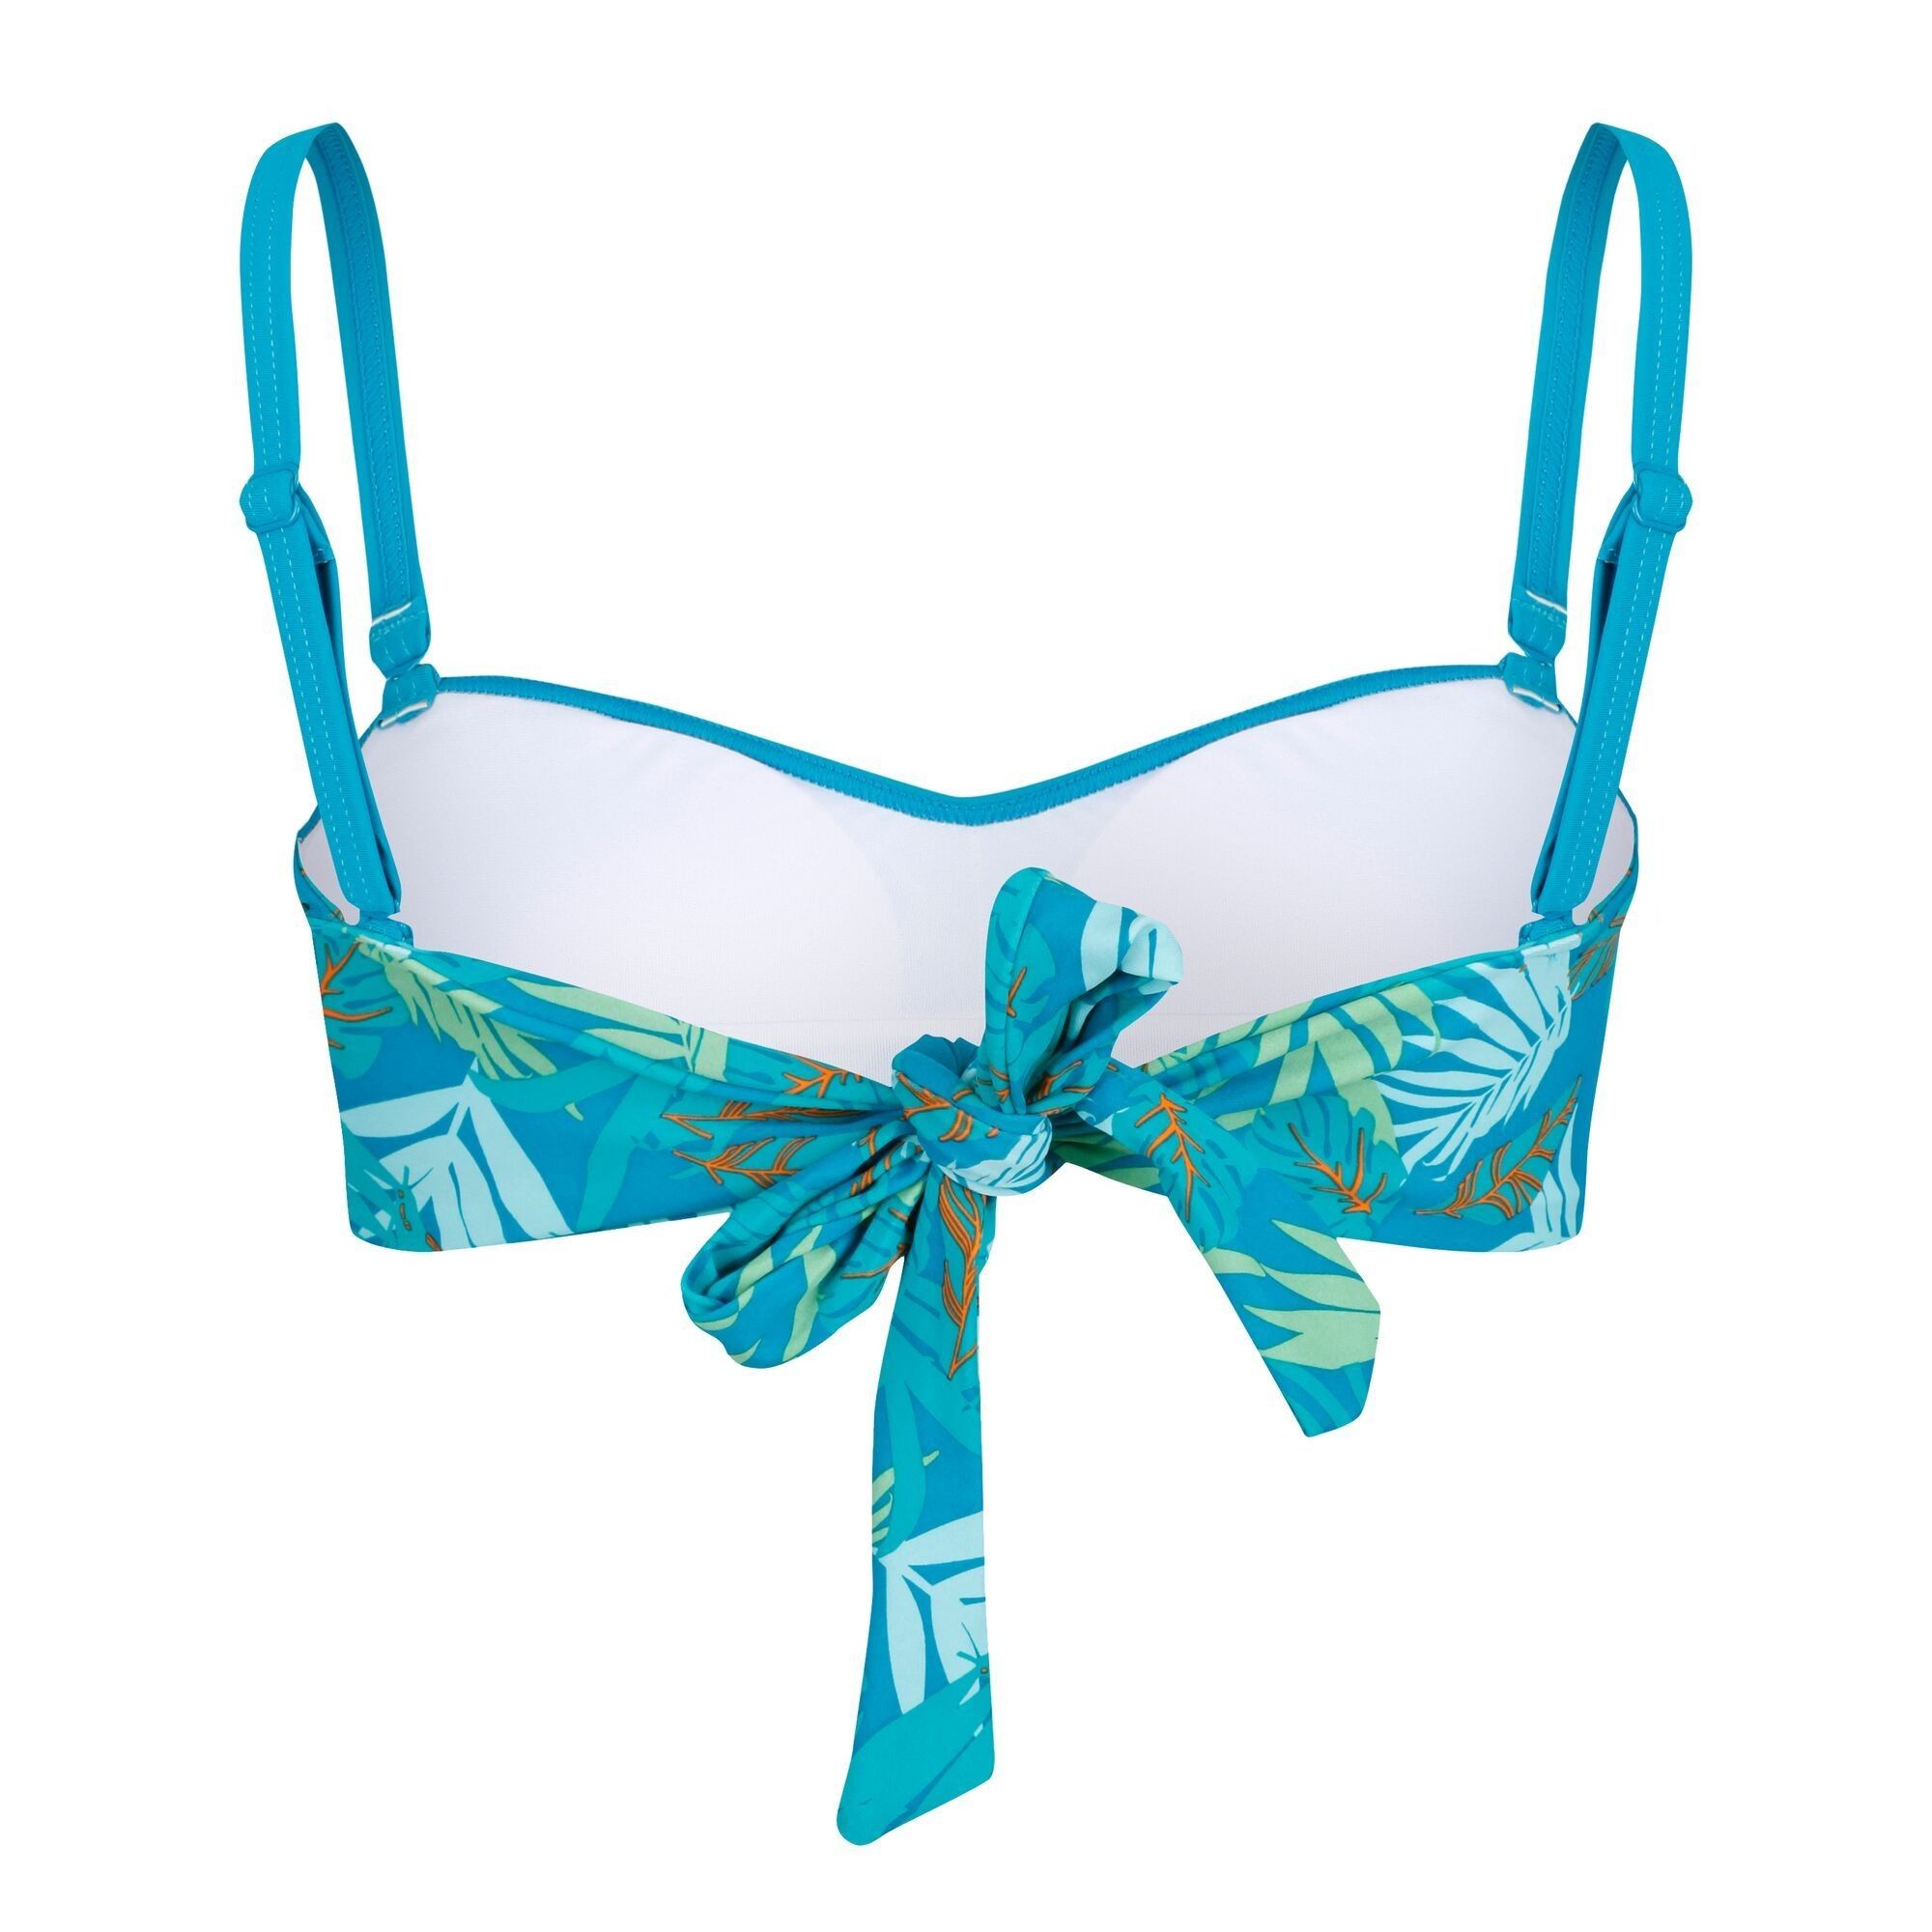 82% Polyamide, 18% Elastane. The Aceana Bikini Top is made from supremely soft, stretch fabric. A bandeau style with a supportive light foam cup and ruching details. Adjustable straps for multiway styling.